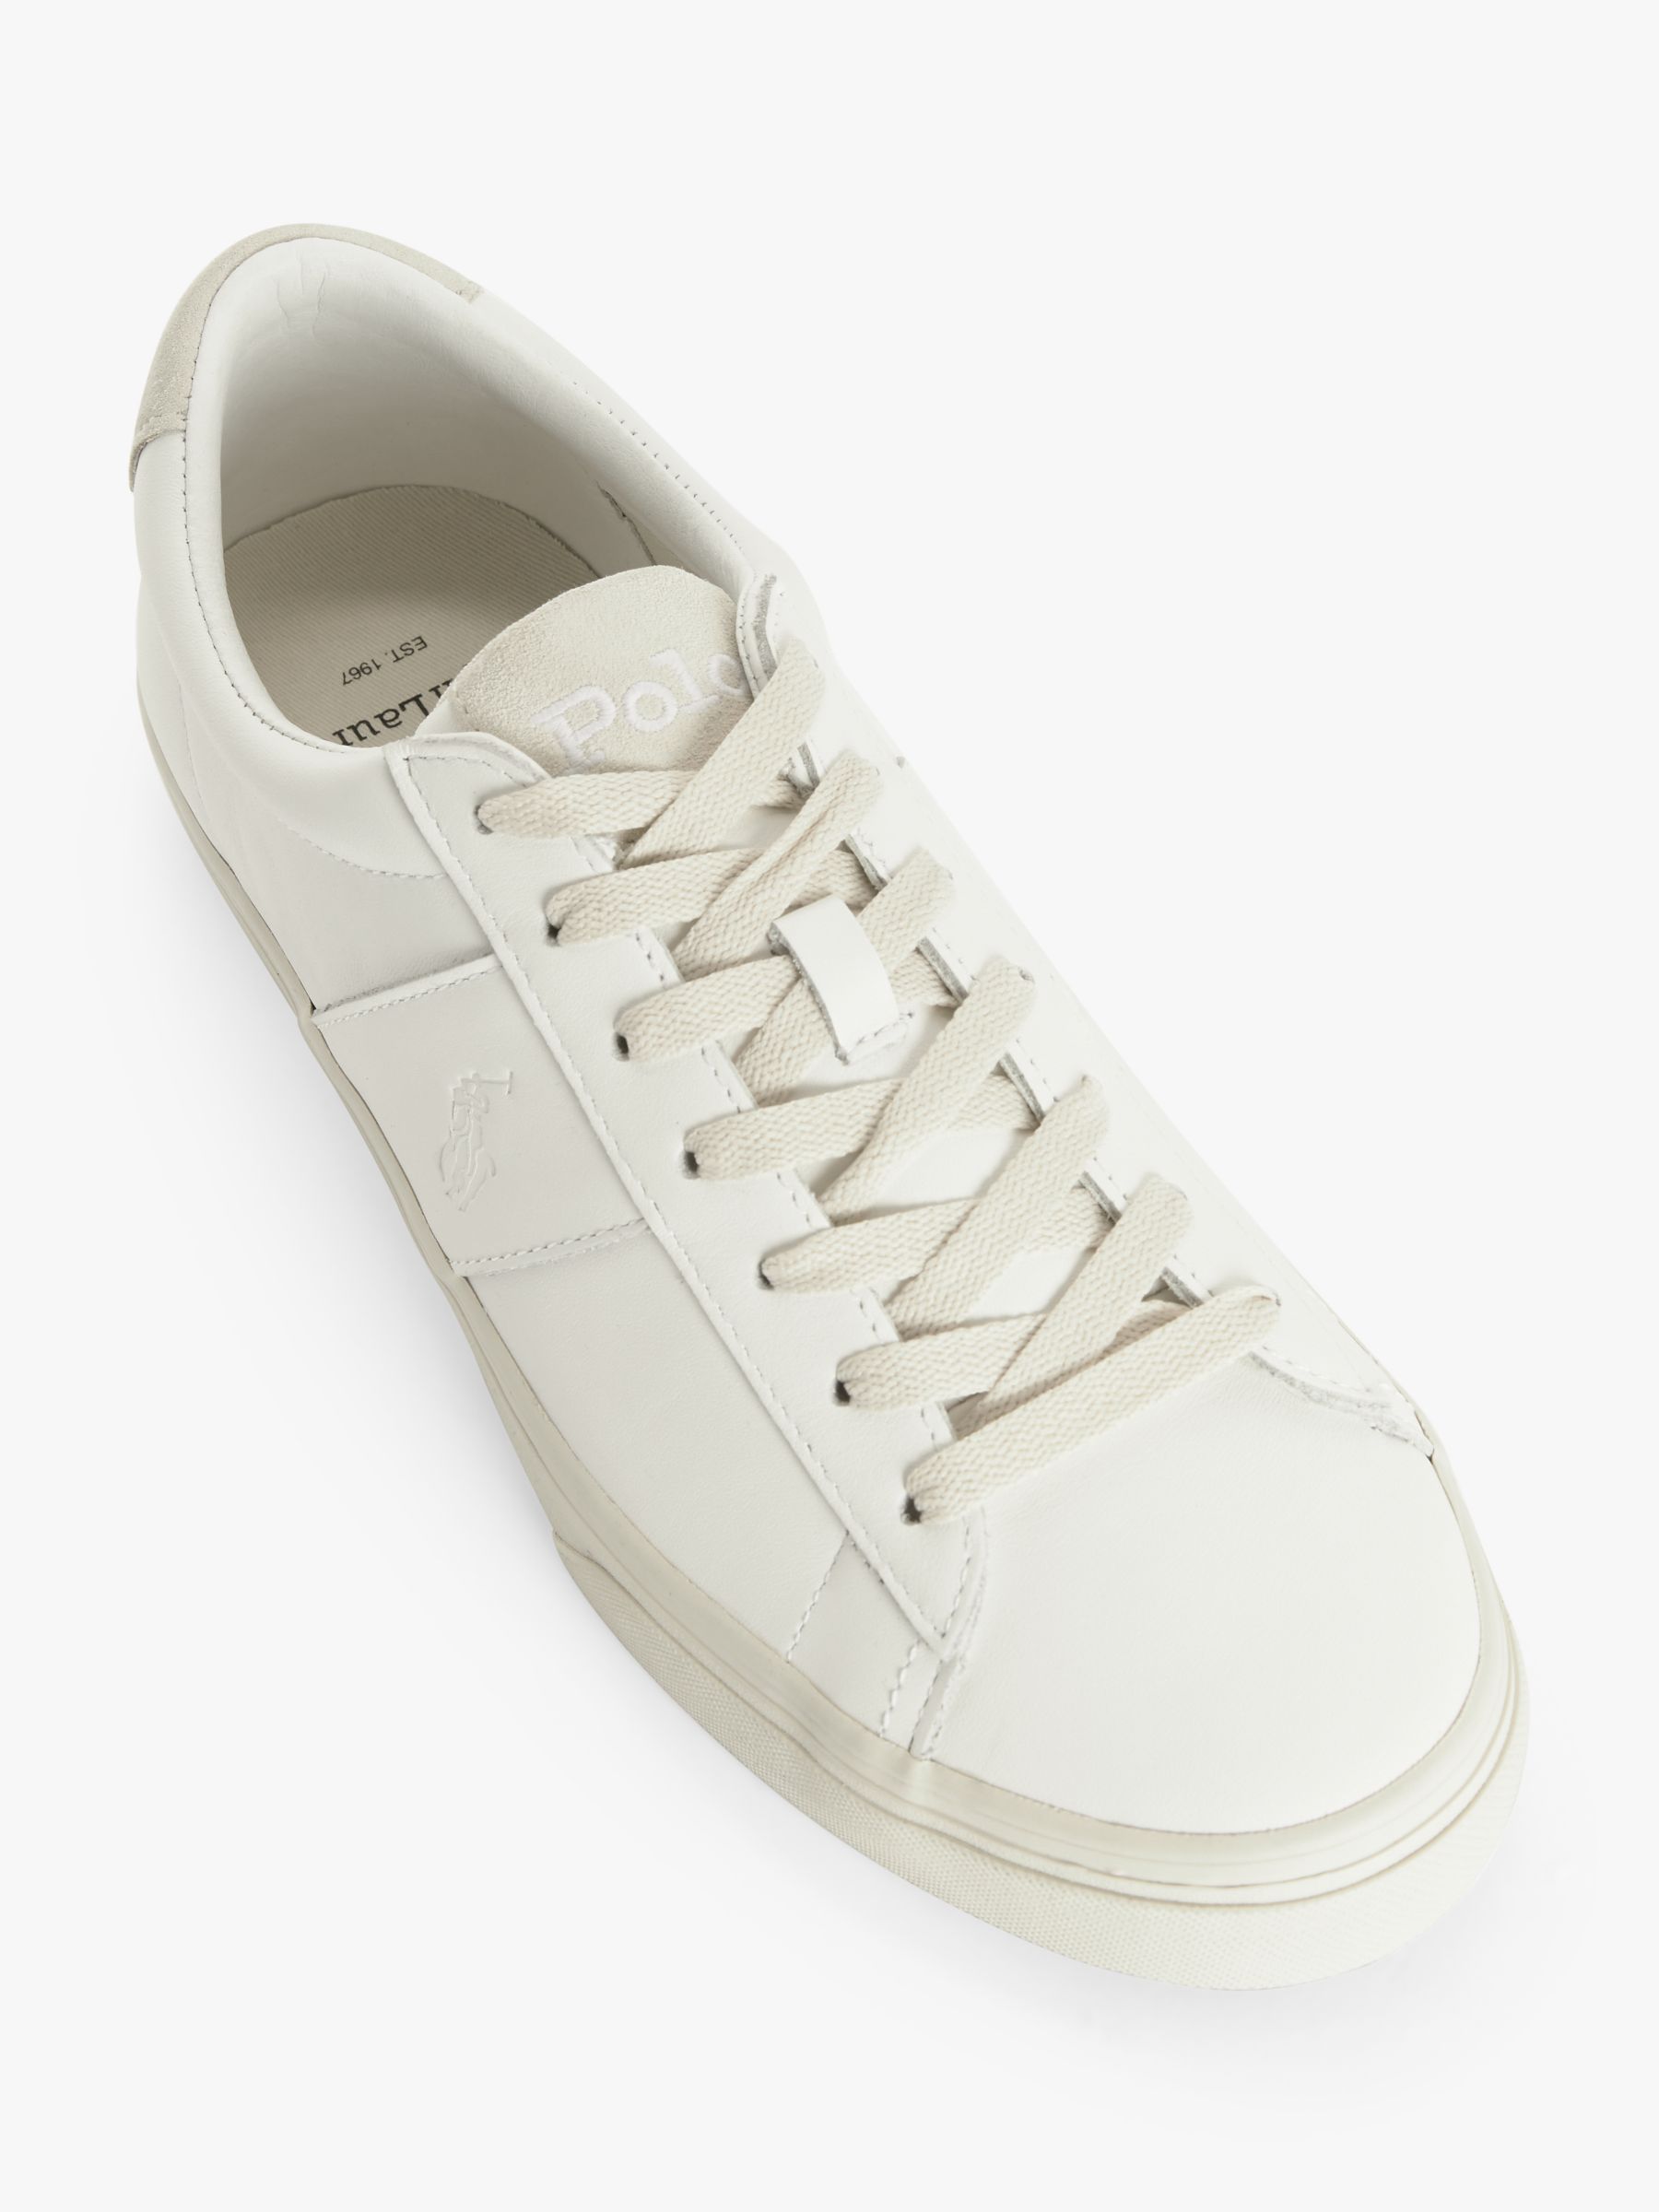 polo ralph lauren sayer leather trainers